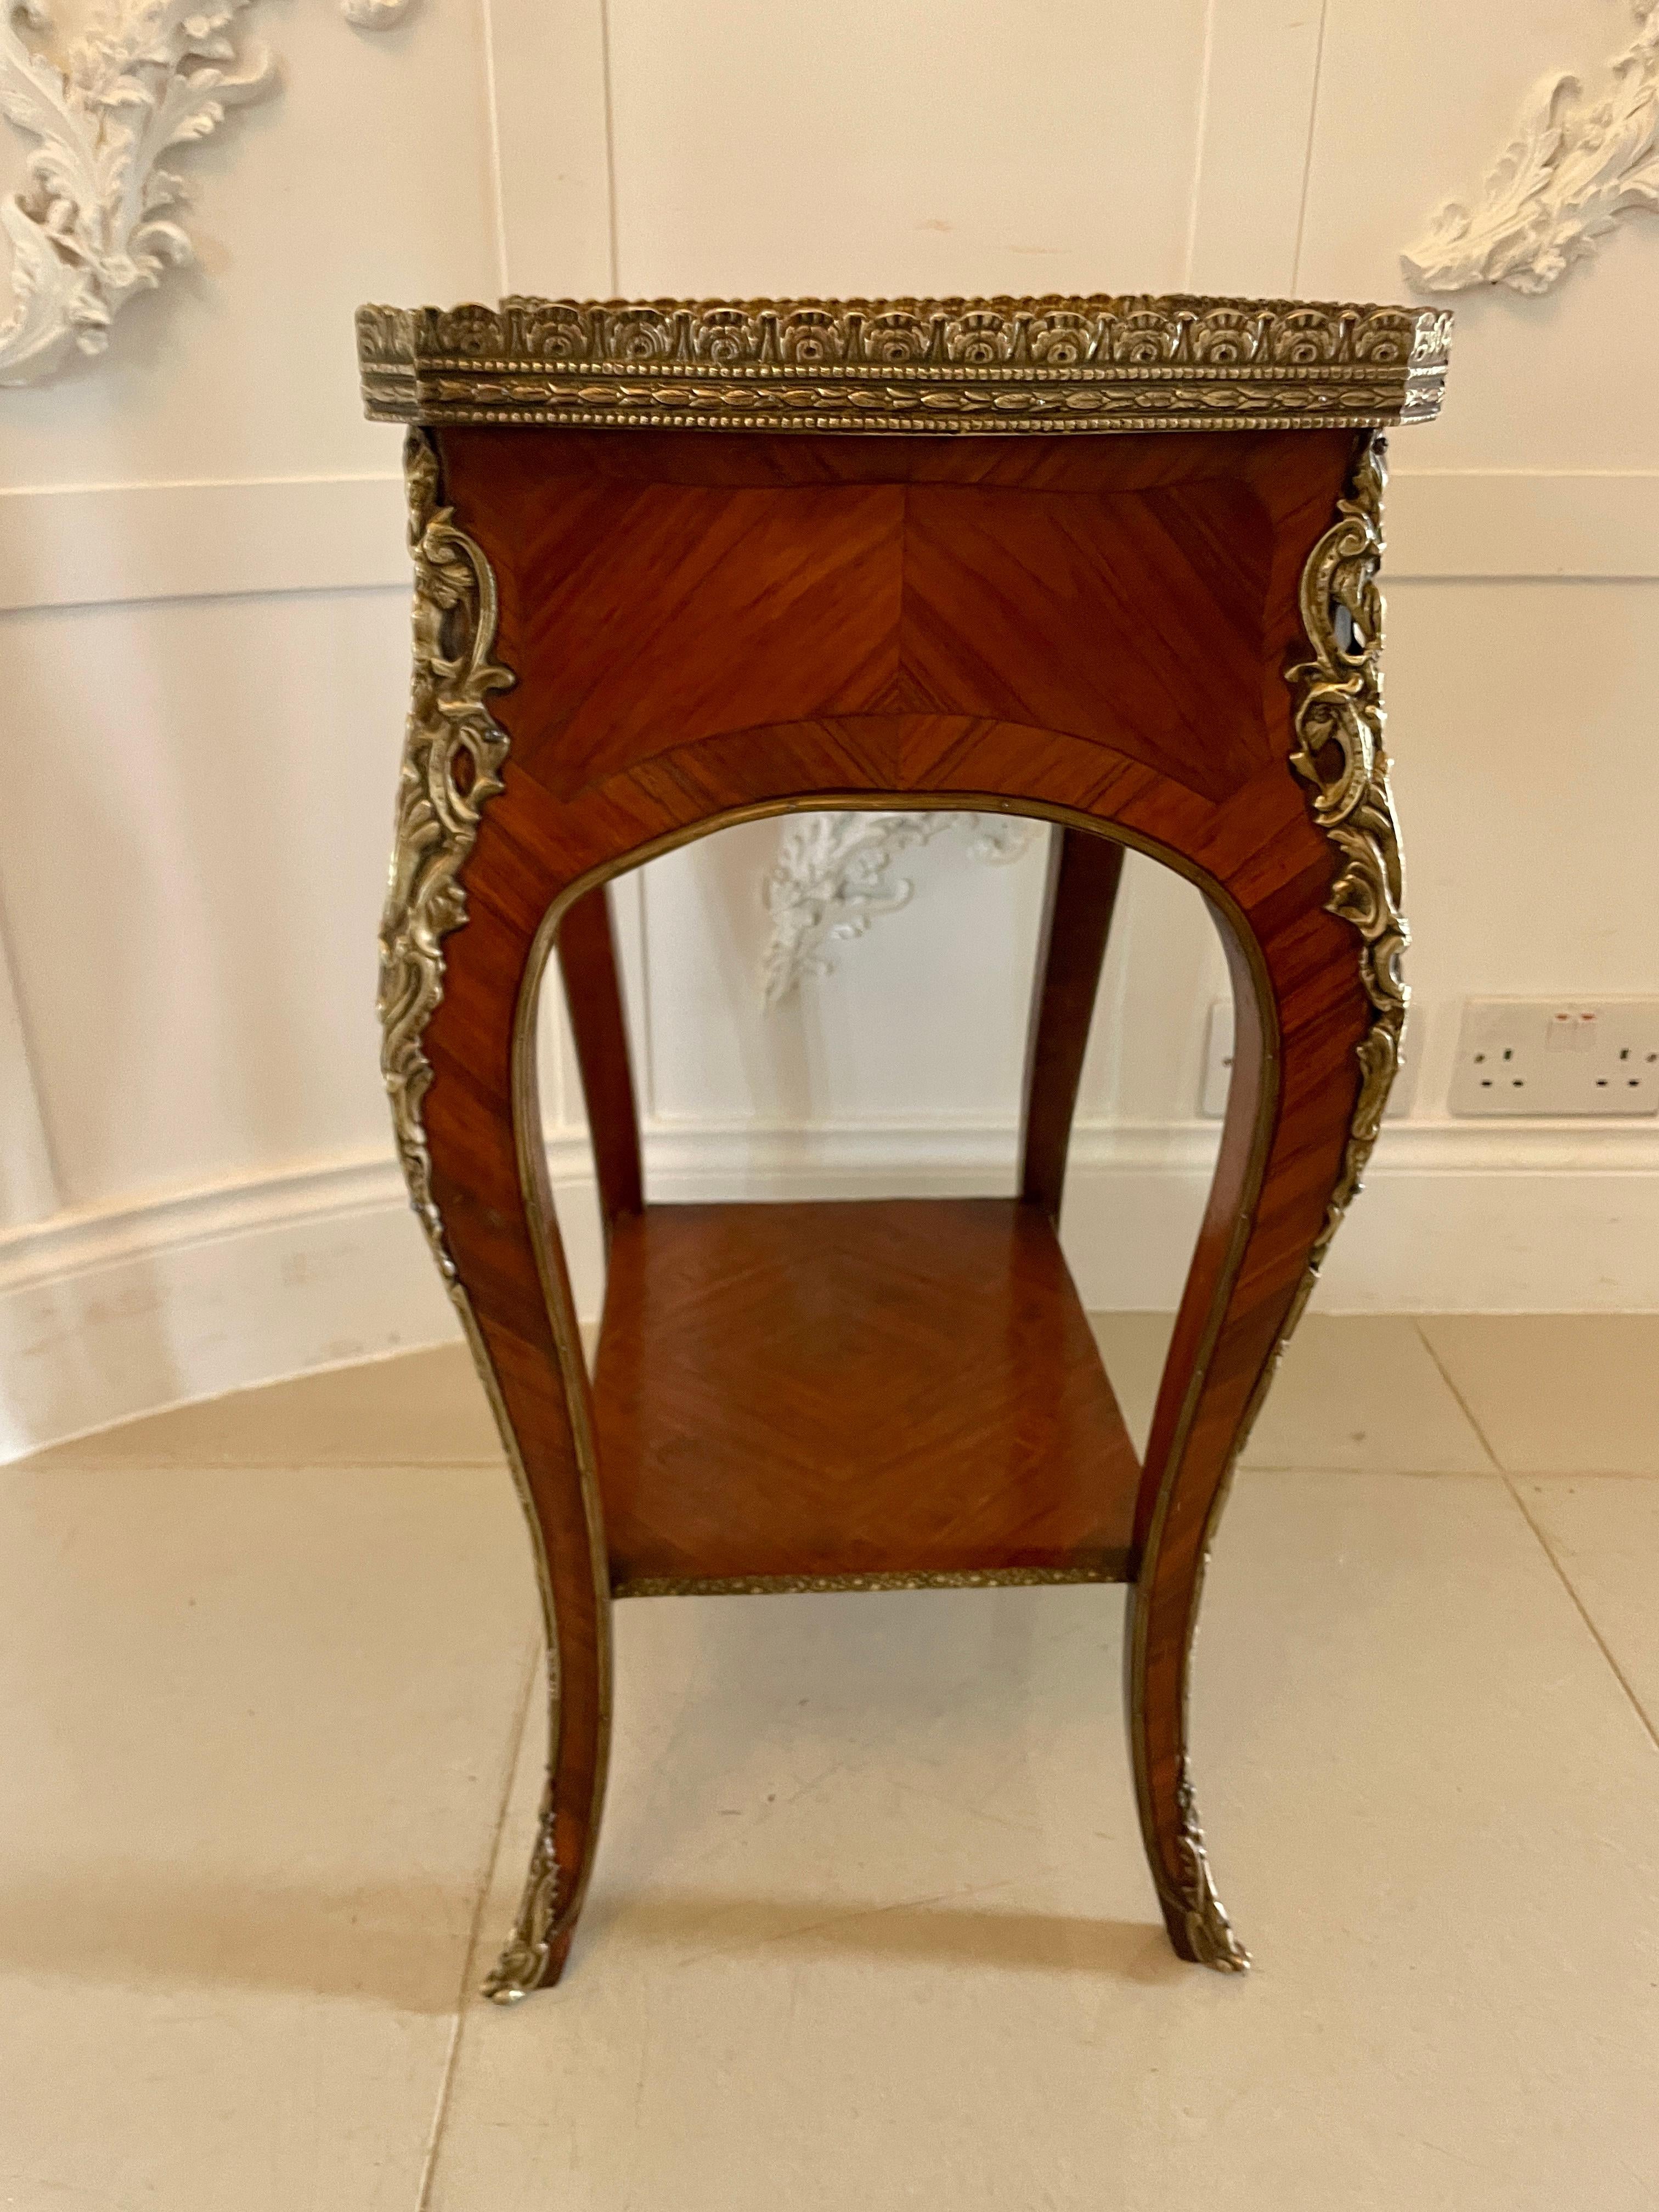 Fine Quality Antique Freestanding French Kingwood and Ormolu Mounted Lamp Table For Sale 4